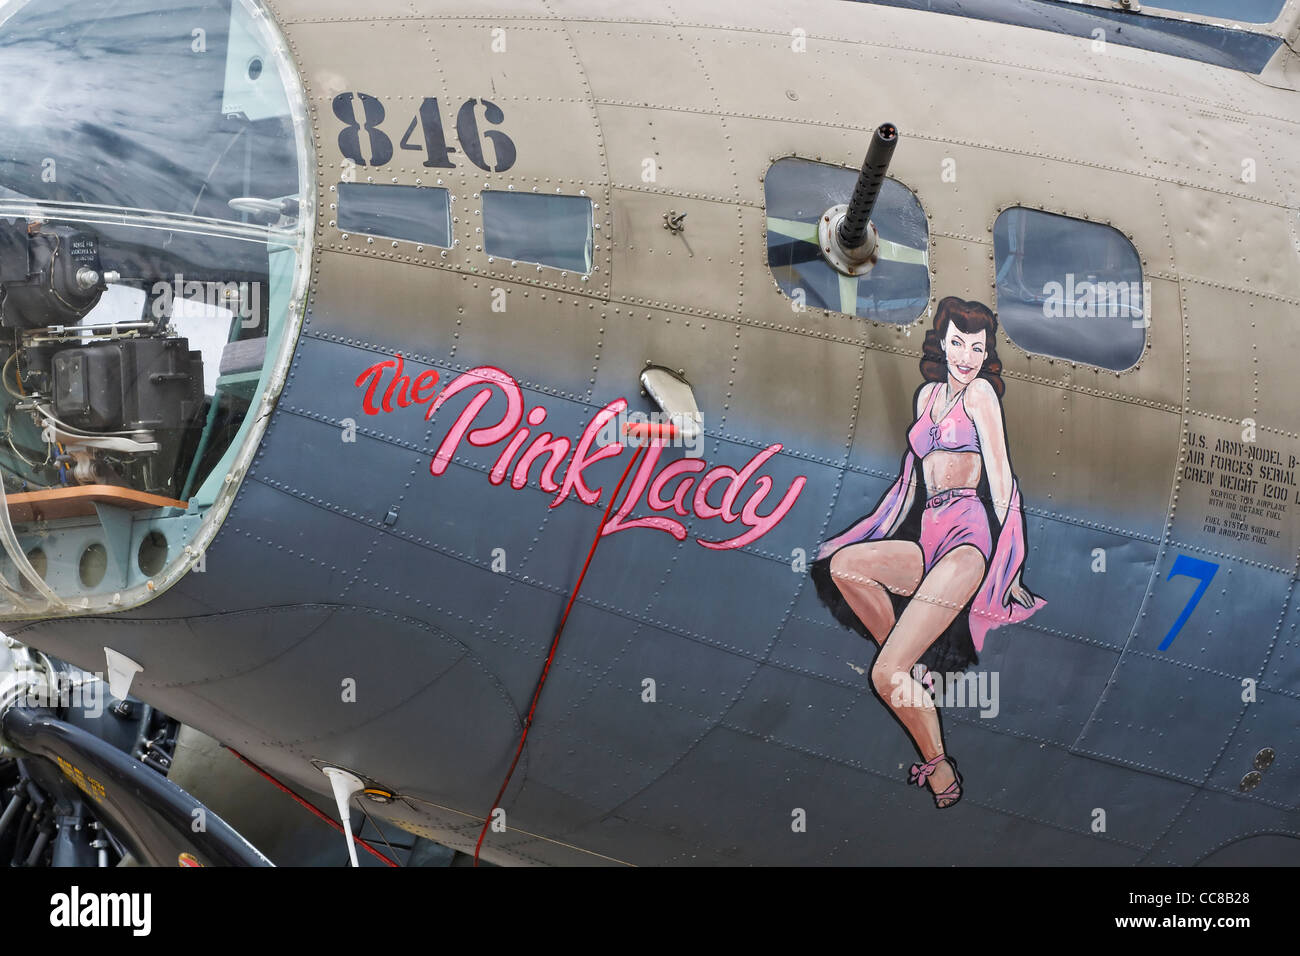 Boeing B17 Flying Fortress - Nose Art Banque D'Images